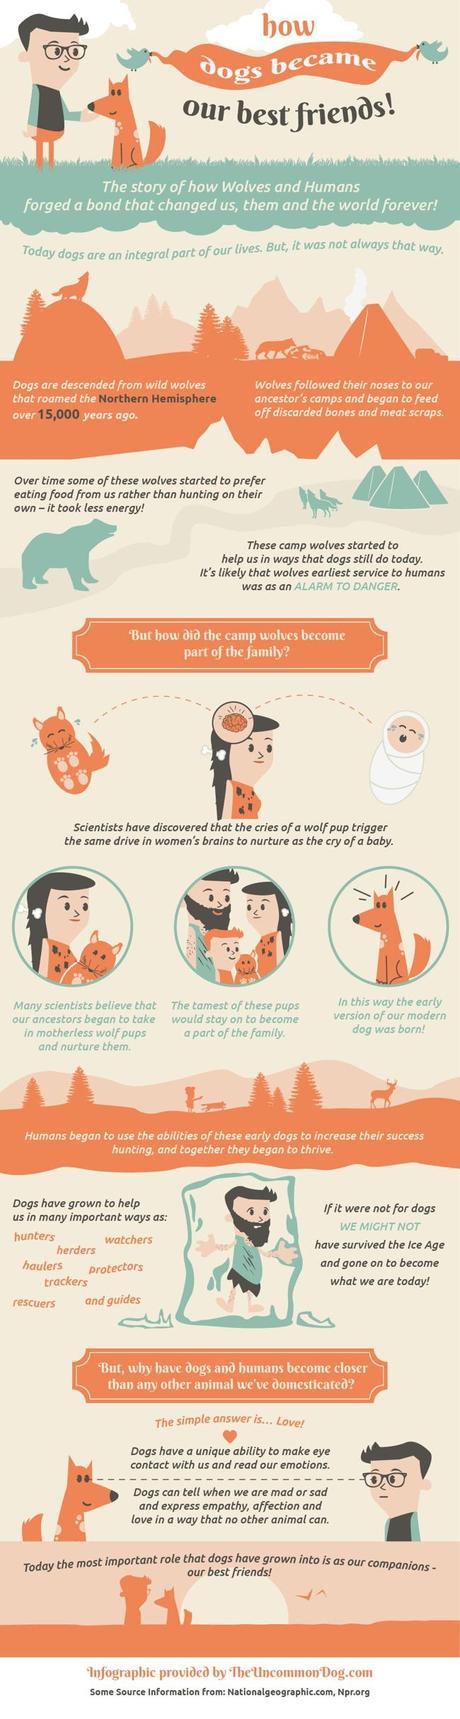 How Dogs Became Our Best Friends